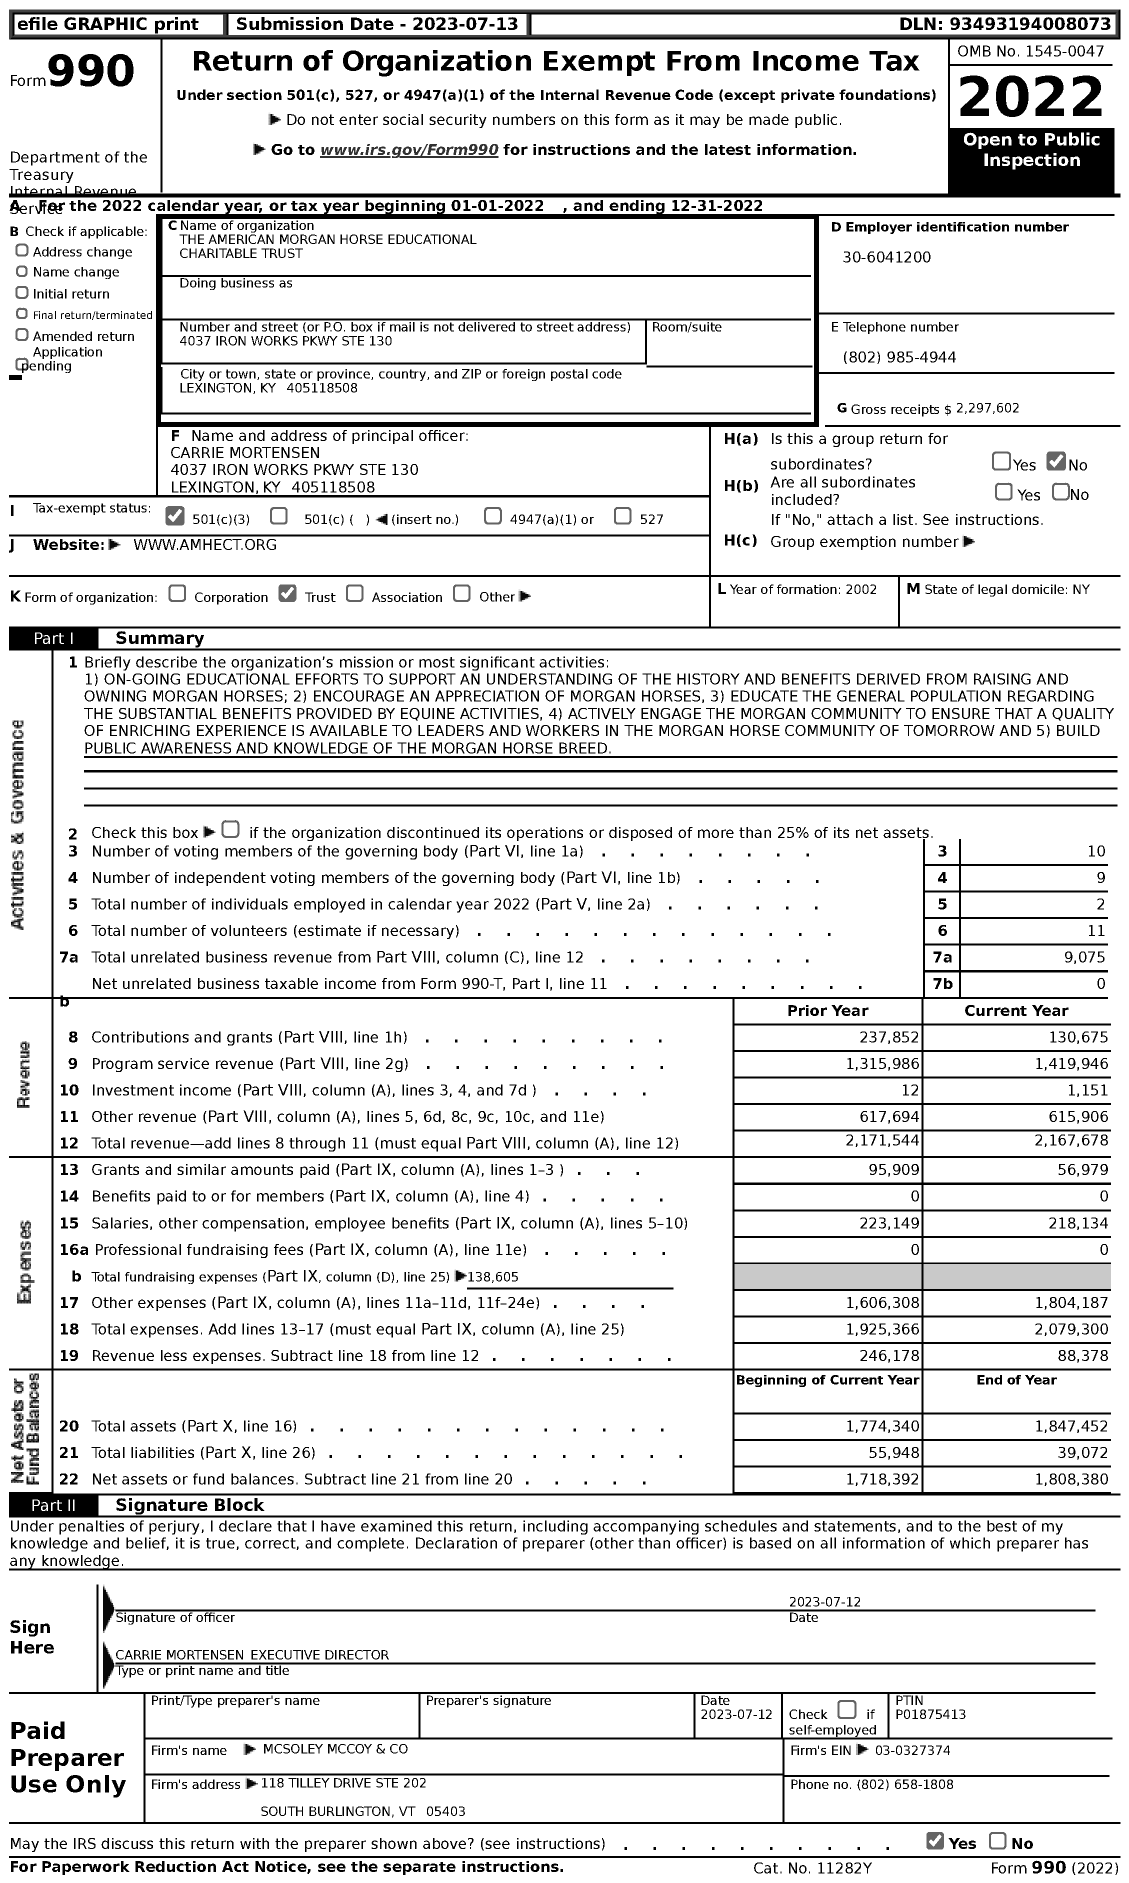 Image of first page of 2022 Form 990 for The American Morgan Horse Educational Charitable Trust